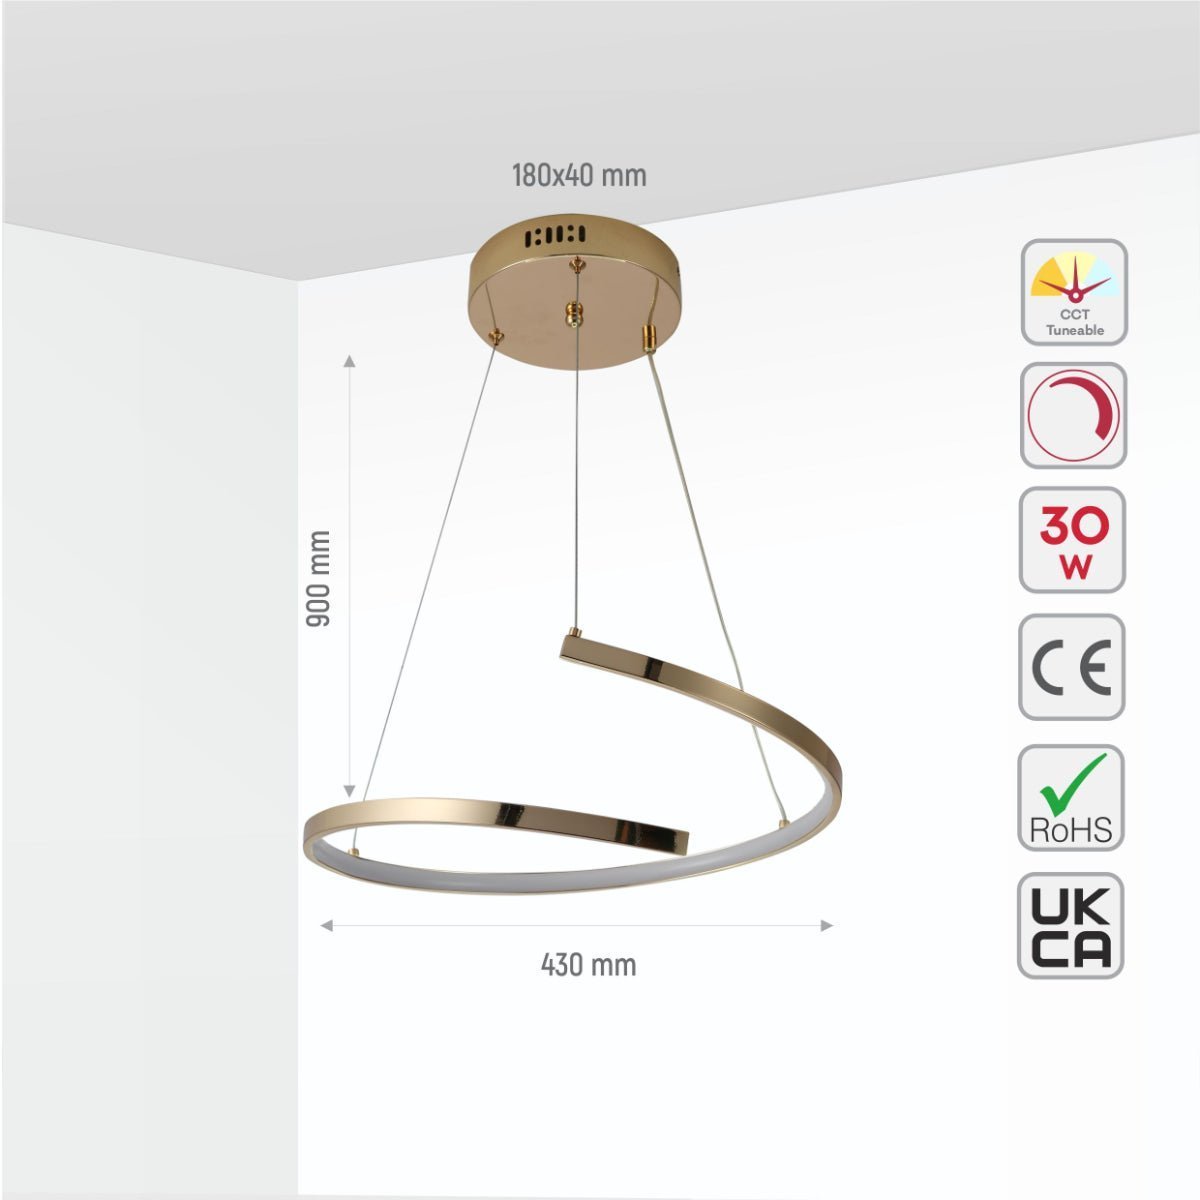 Size and specs of LED Spiral Gold Finishing 30W CCT Change Dimmable Contemporary Nordic Scandinavian Pendant Ceiling Light with Remote Control | TEKLED 154-17268